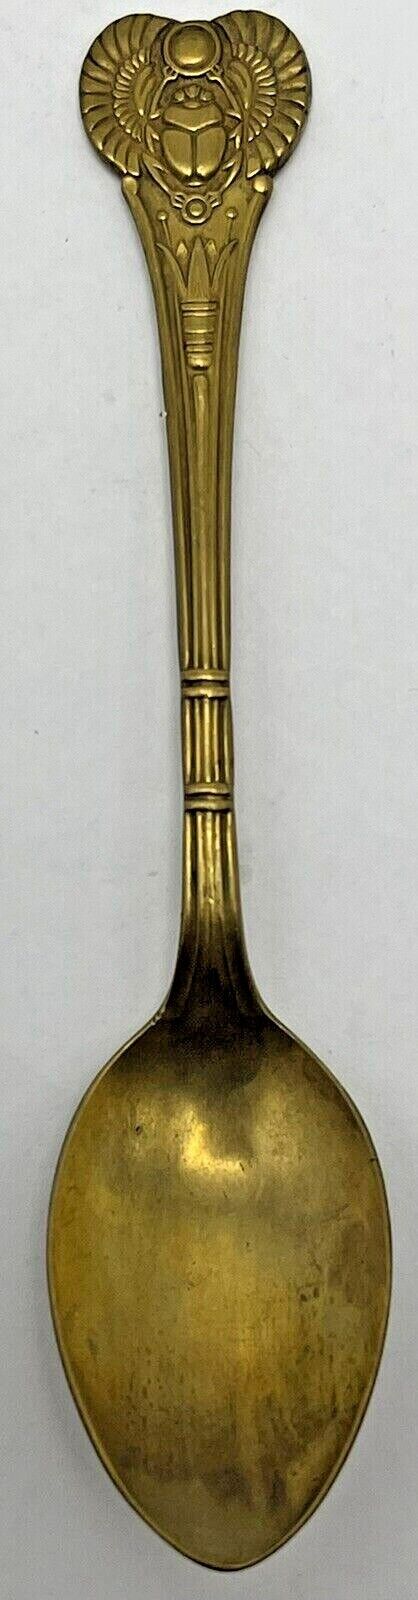 Vintage Wm Rogers Oneida Spoon Egyptian Revival Scarab Gold Color